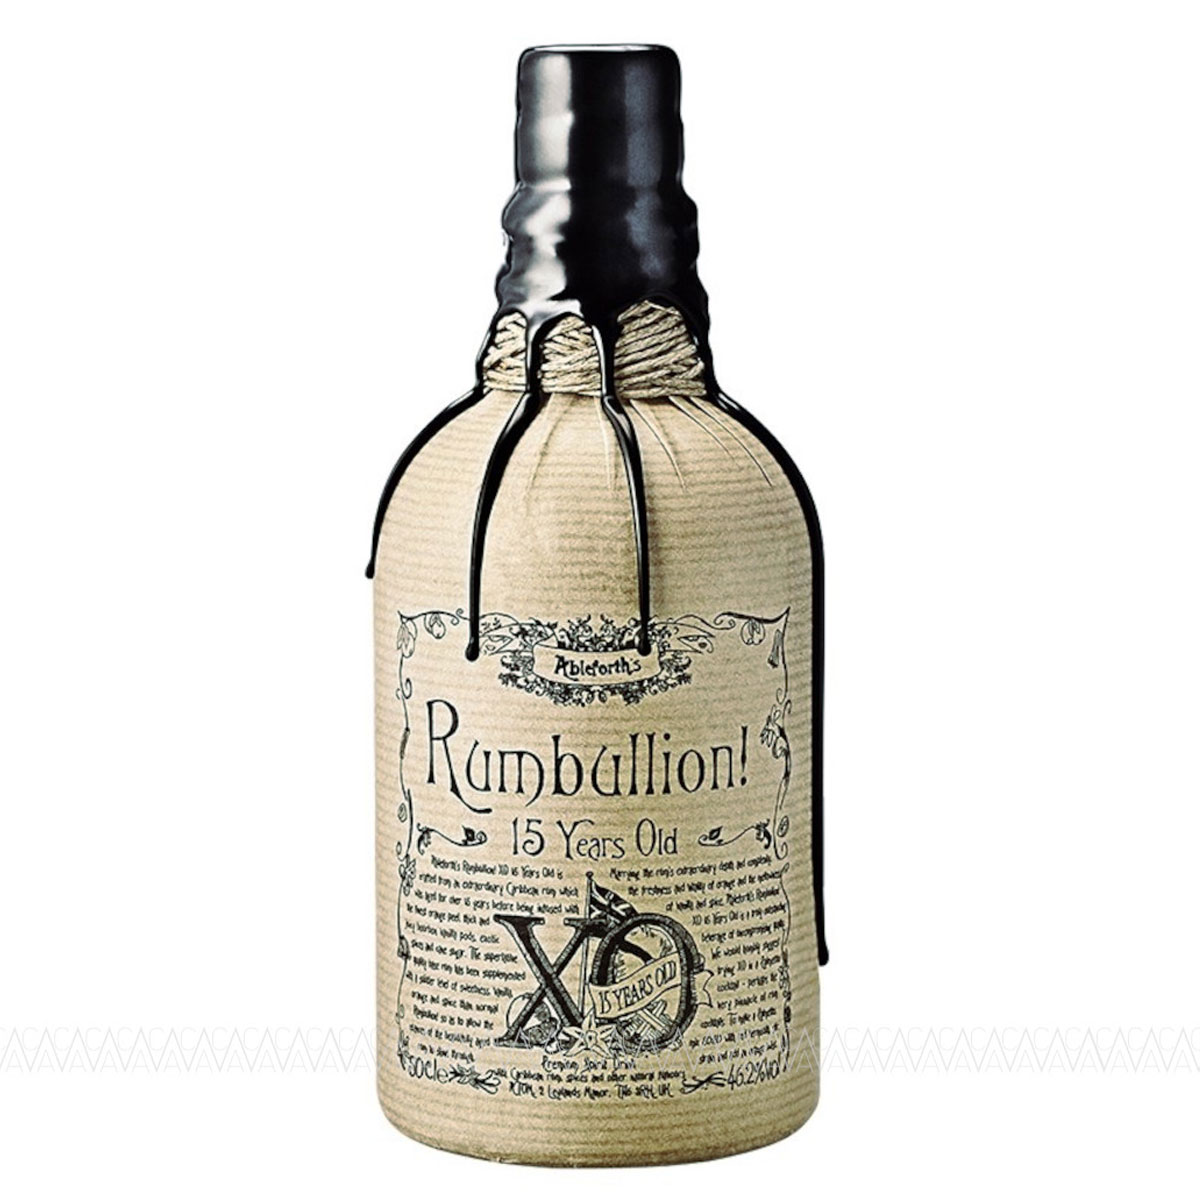 a bottle of rumbullion ableforth xo 15 years old